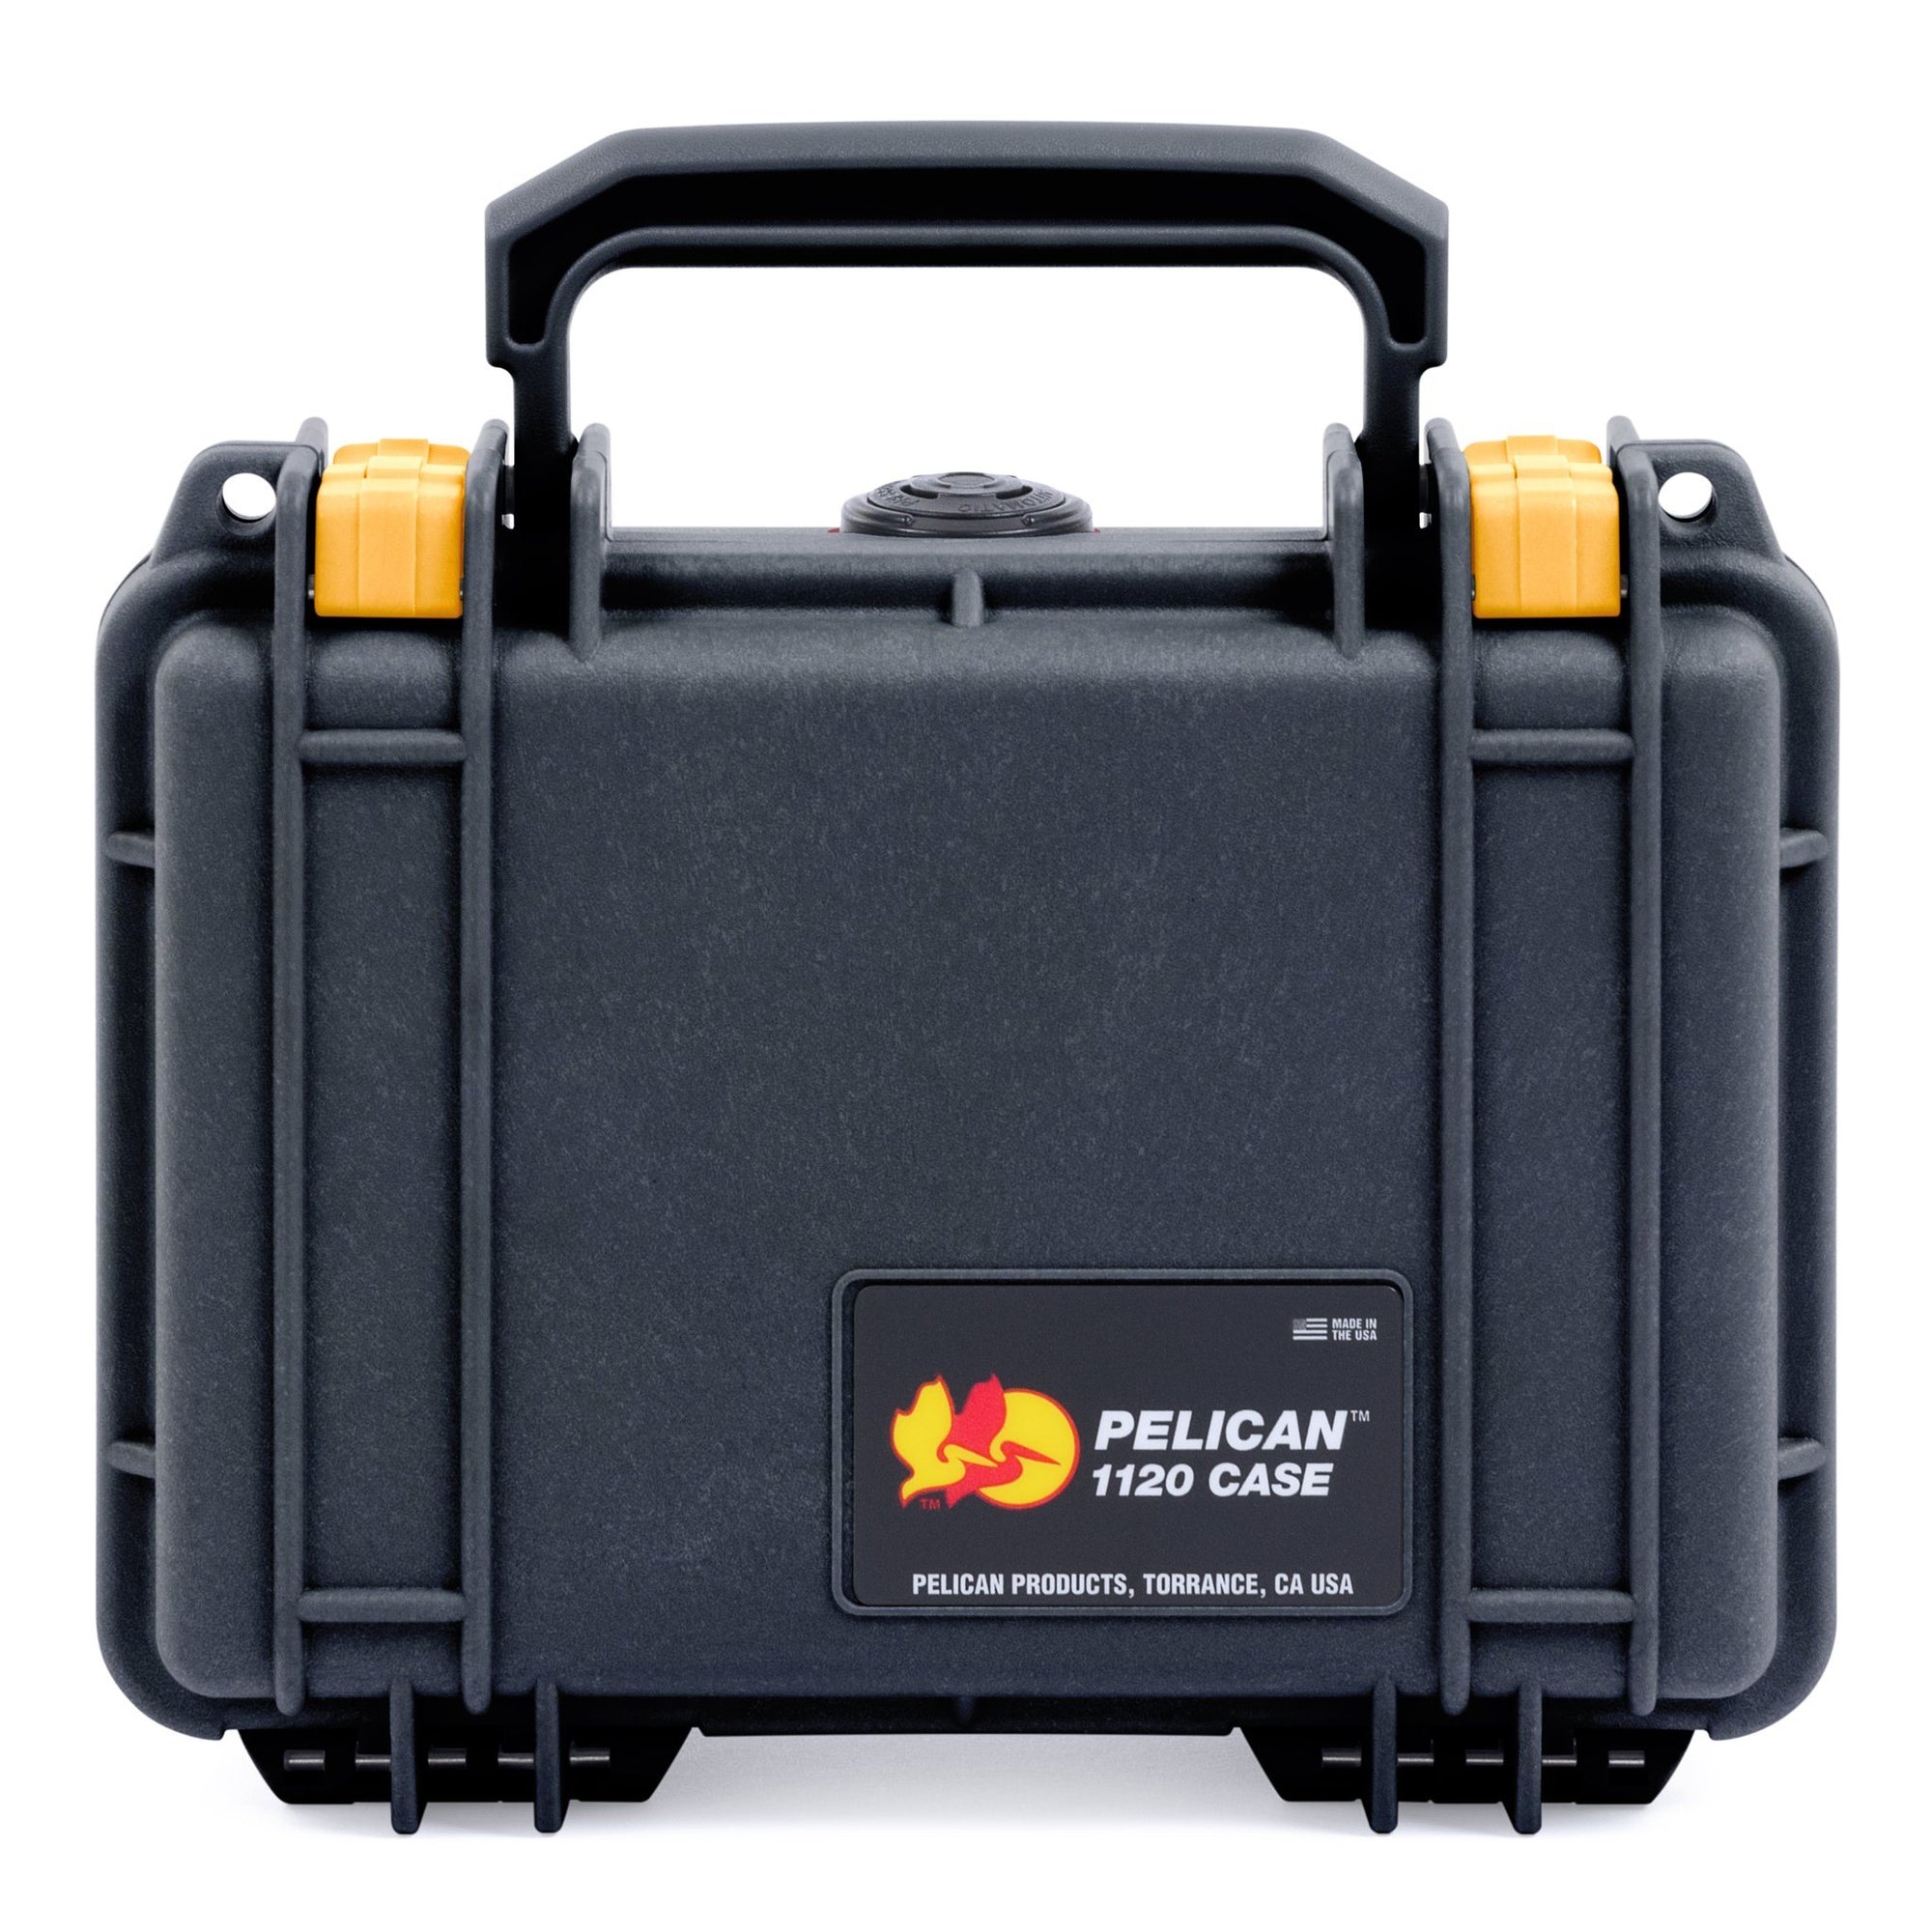 Pelican 1120 Case, Black with Yellow Latches ColorCase 